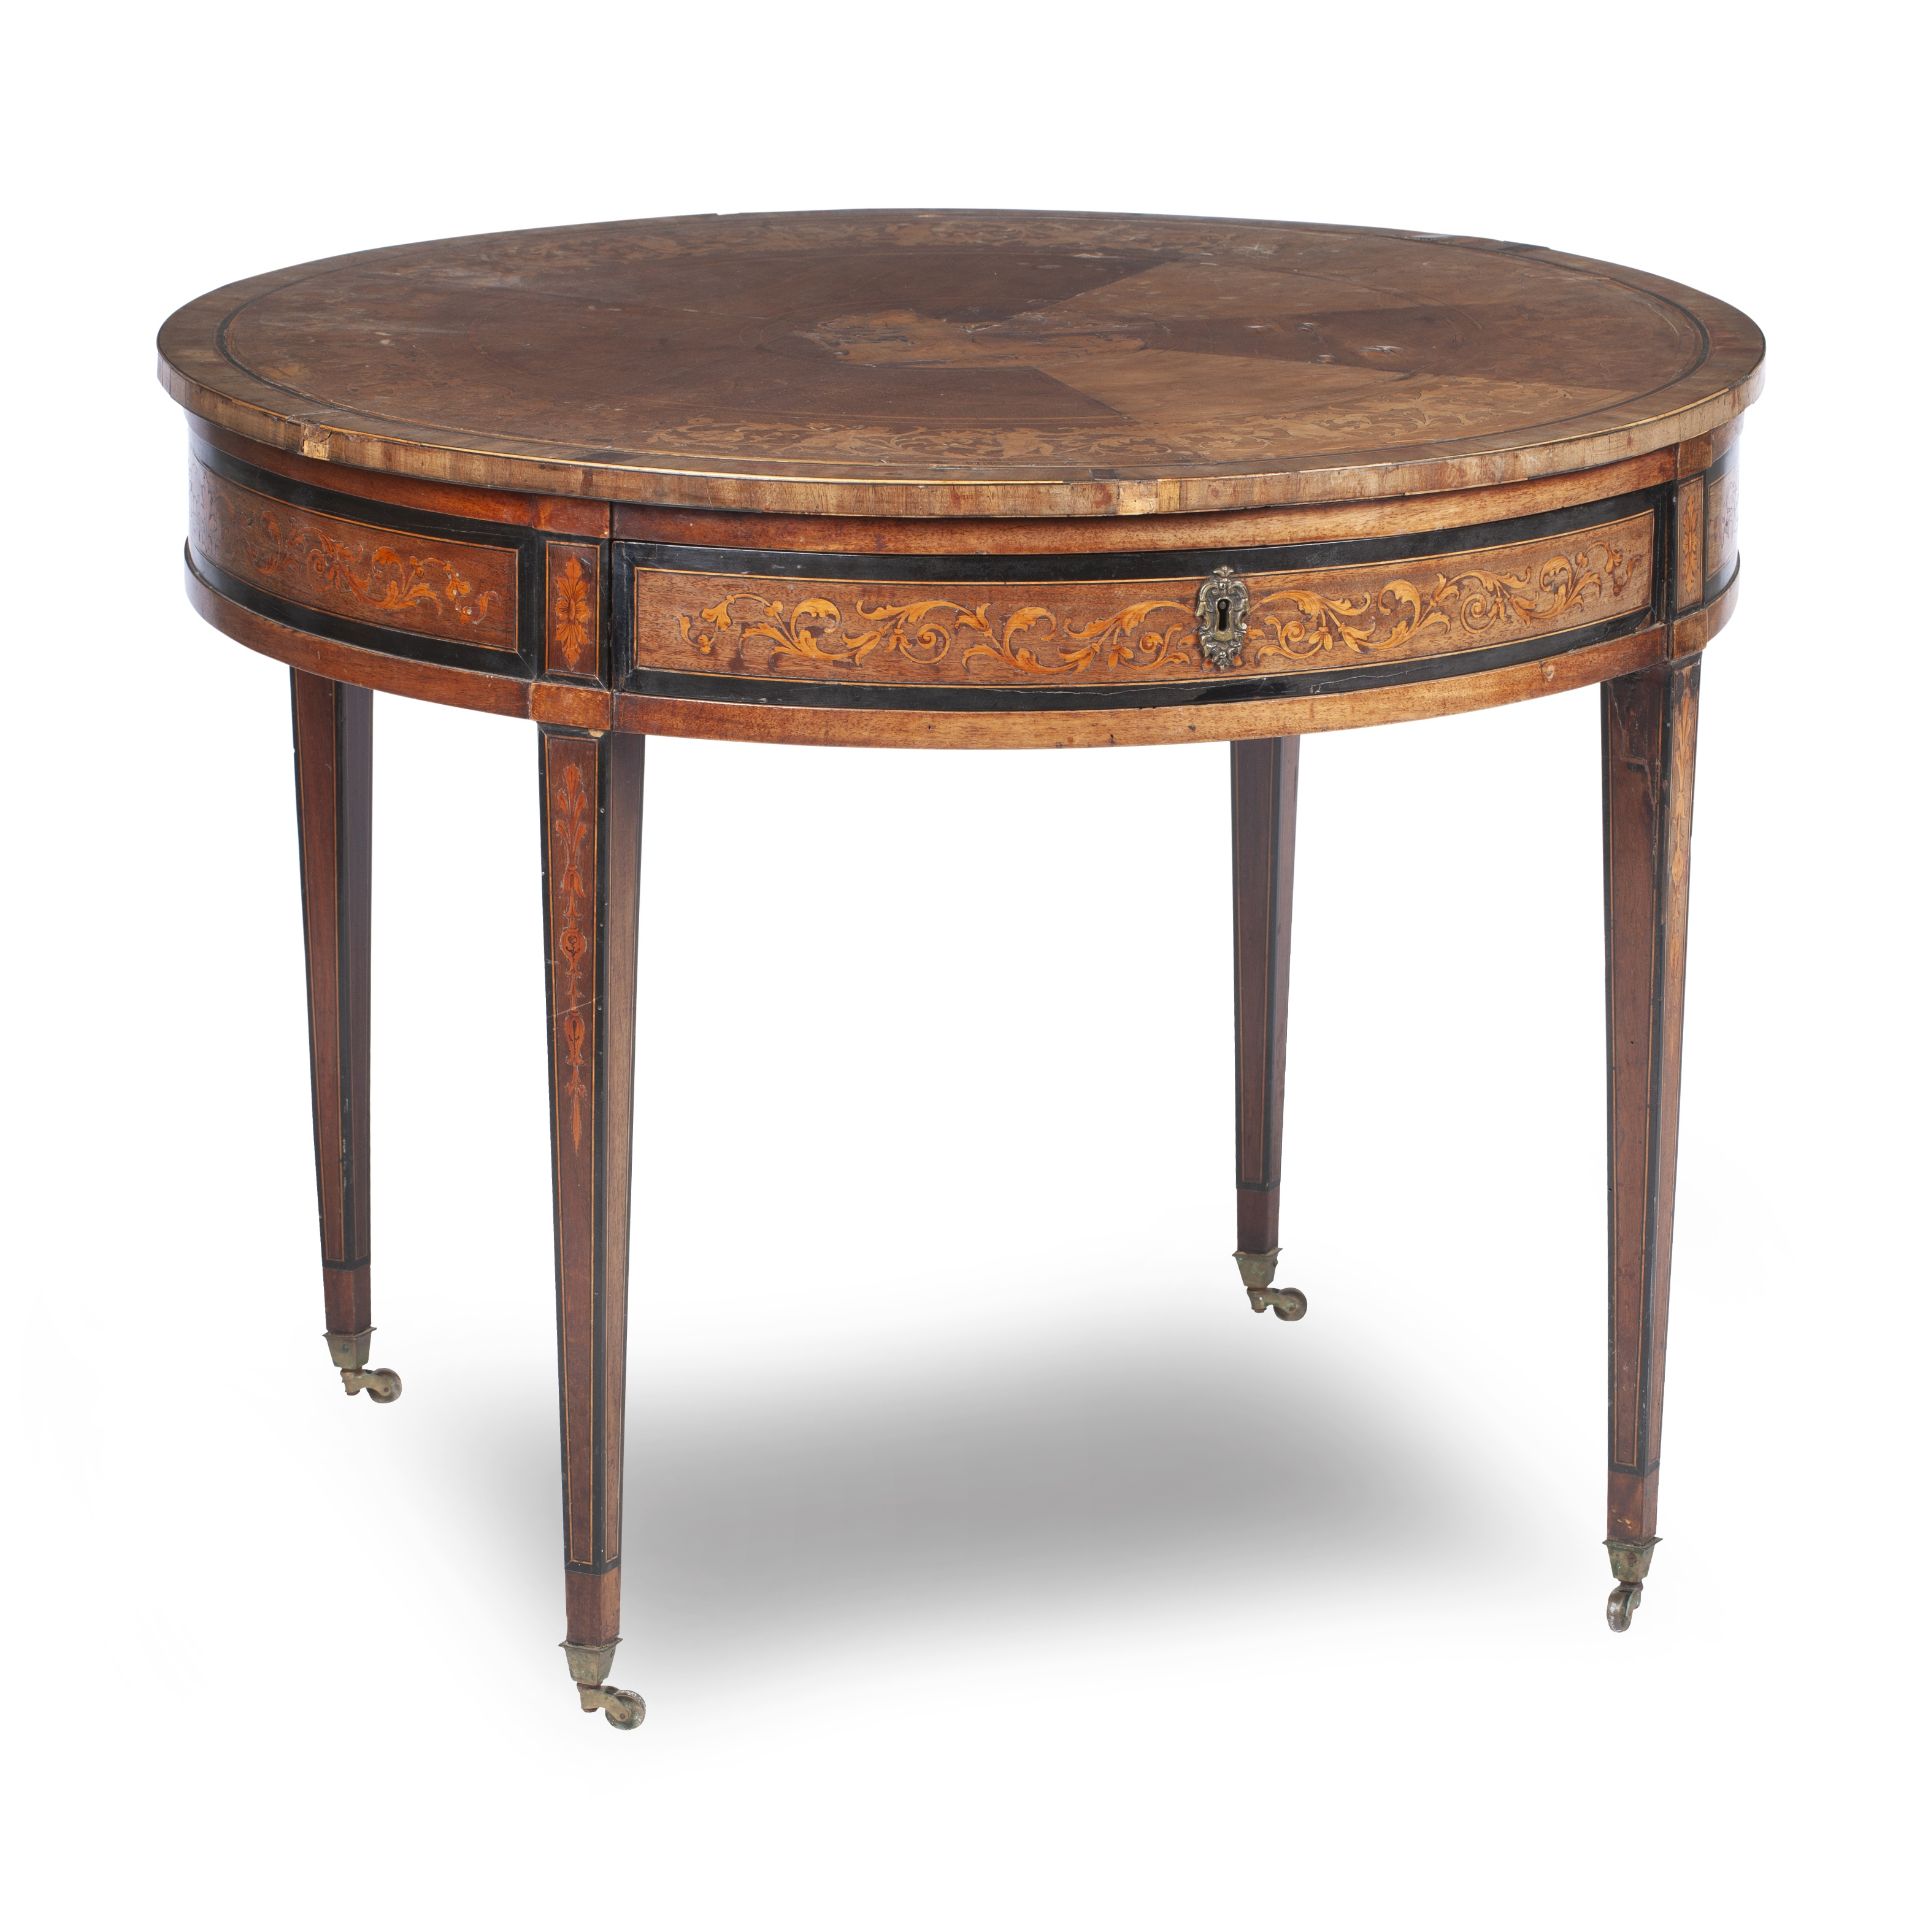 A North European Walnut and Marquetry Centre Table19th century